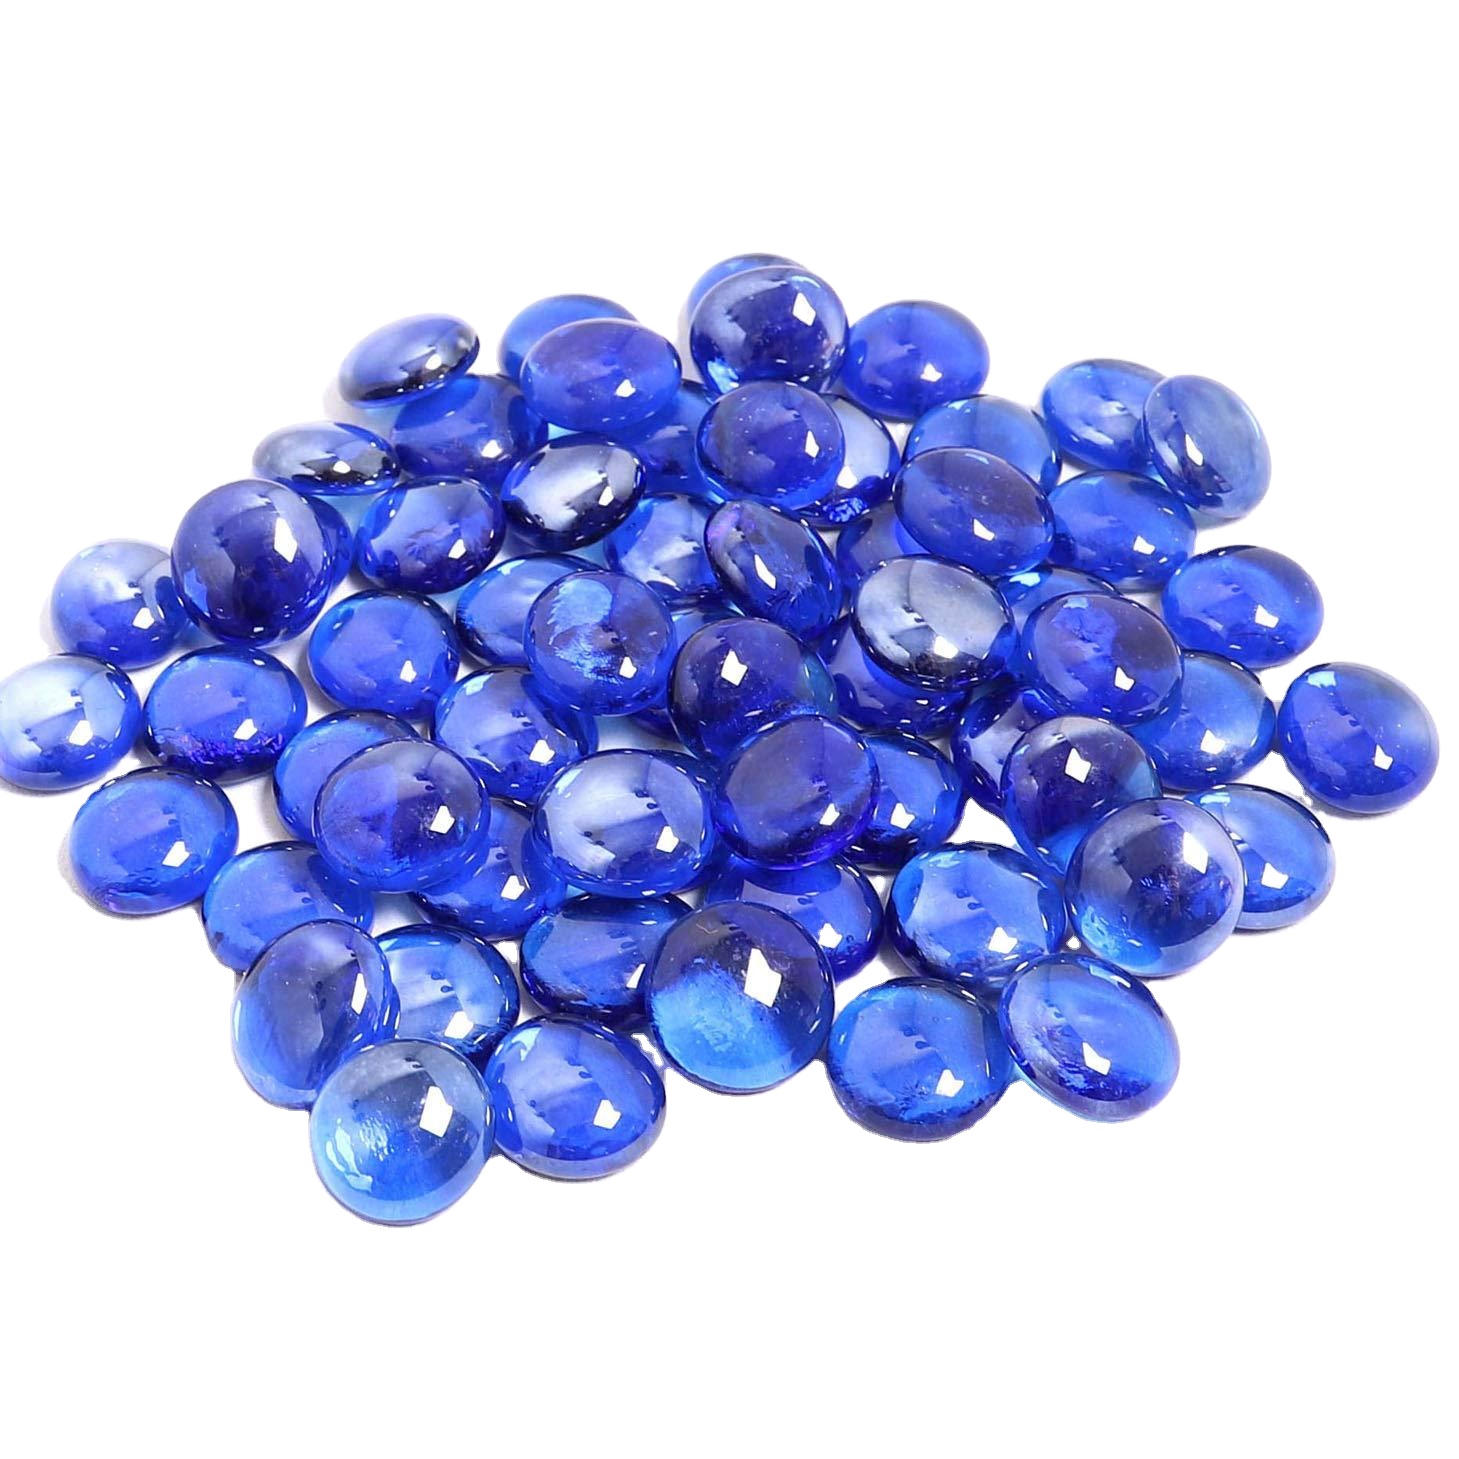 14mm 16mm 25mm 35mm glass ball for Children's toy marbles